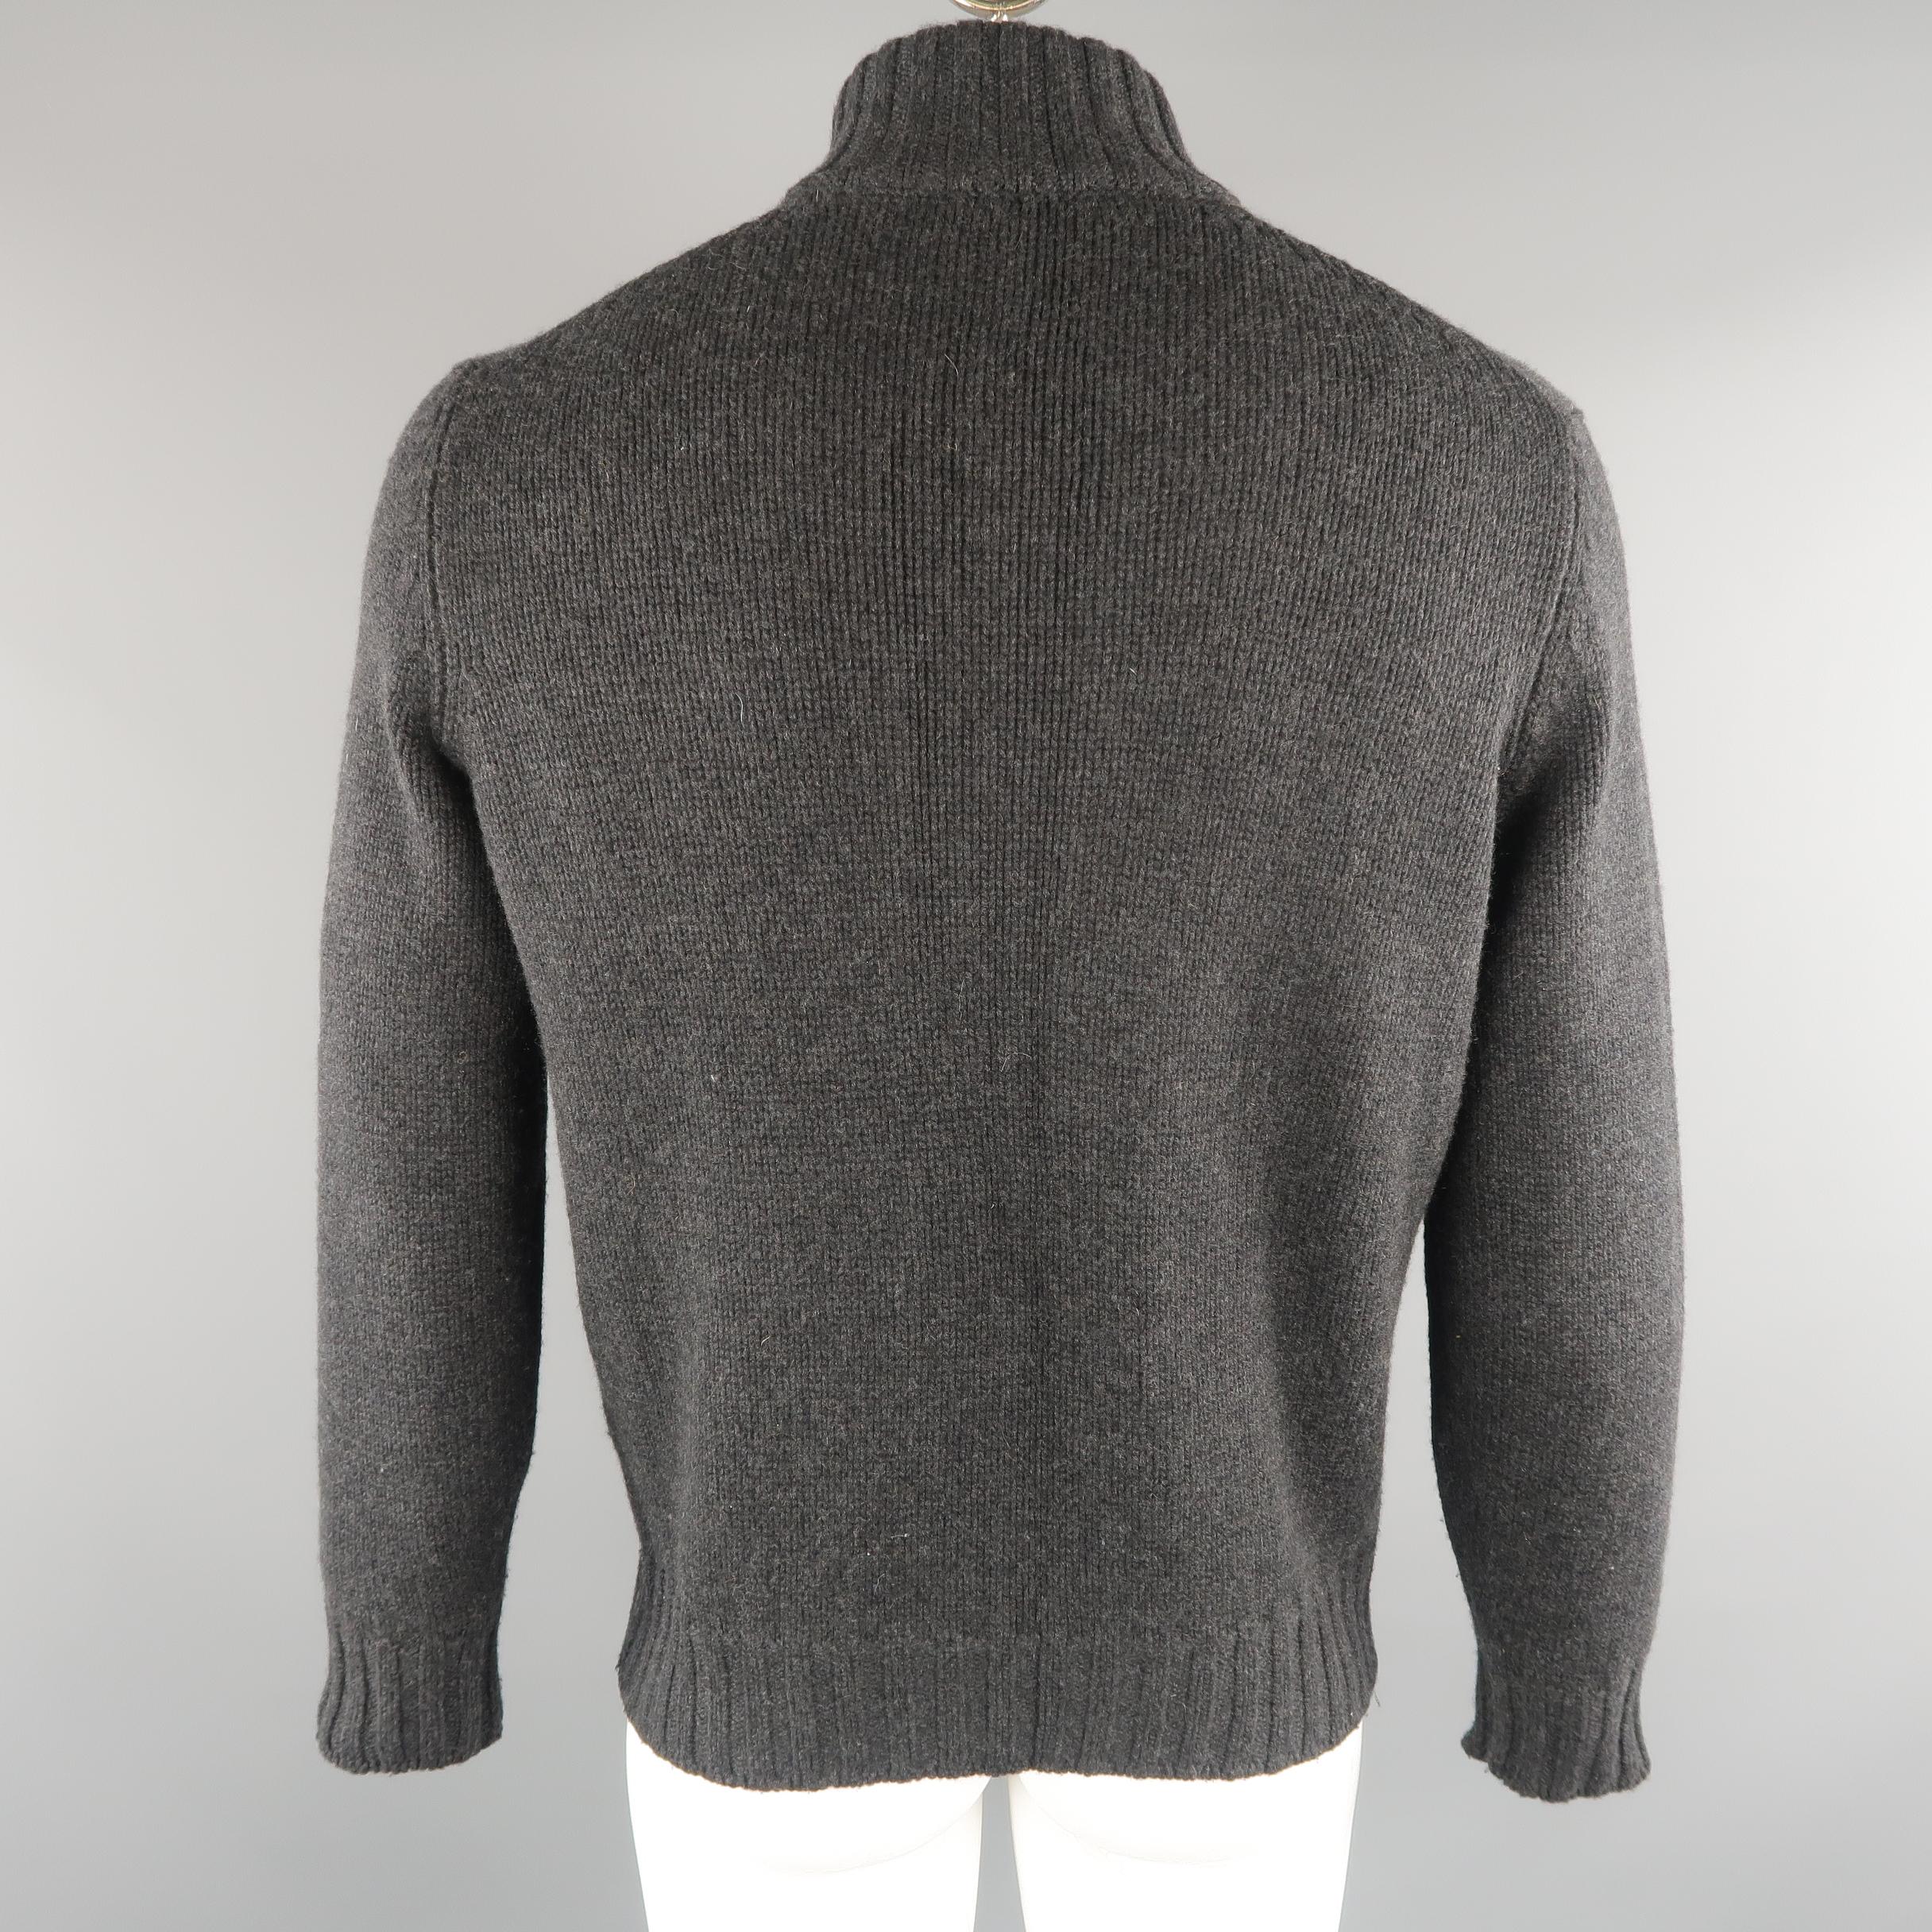 Men's BRUNELLO CUCINELLI Size 42 Charcoal Knitted Cashmere Pullover Sweater